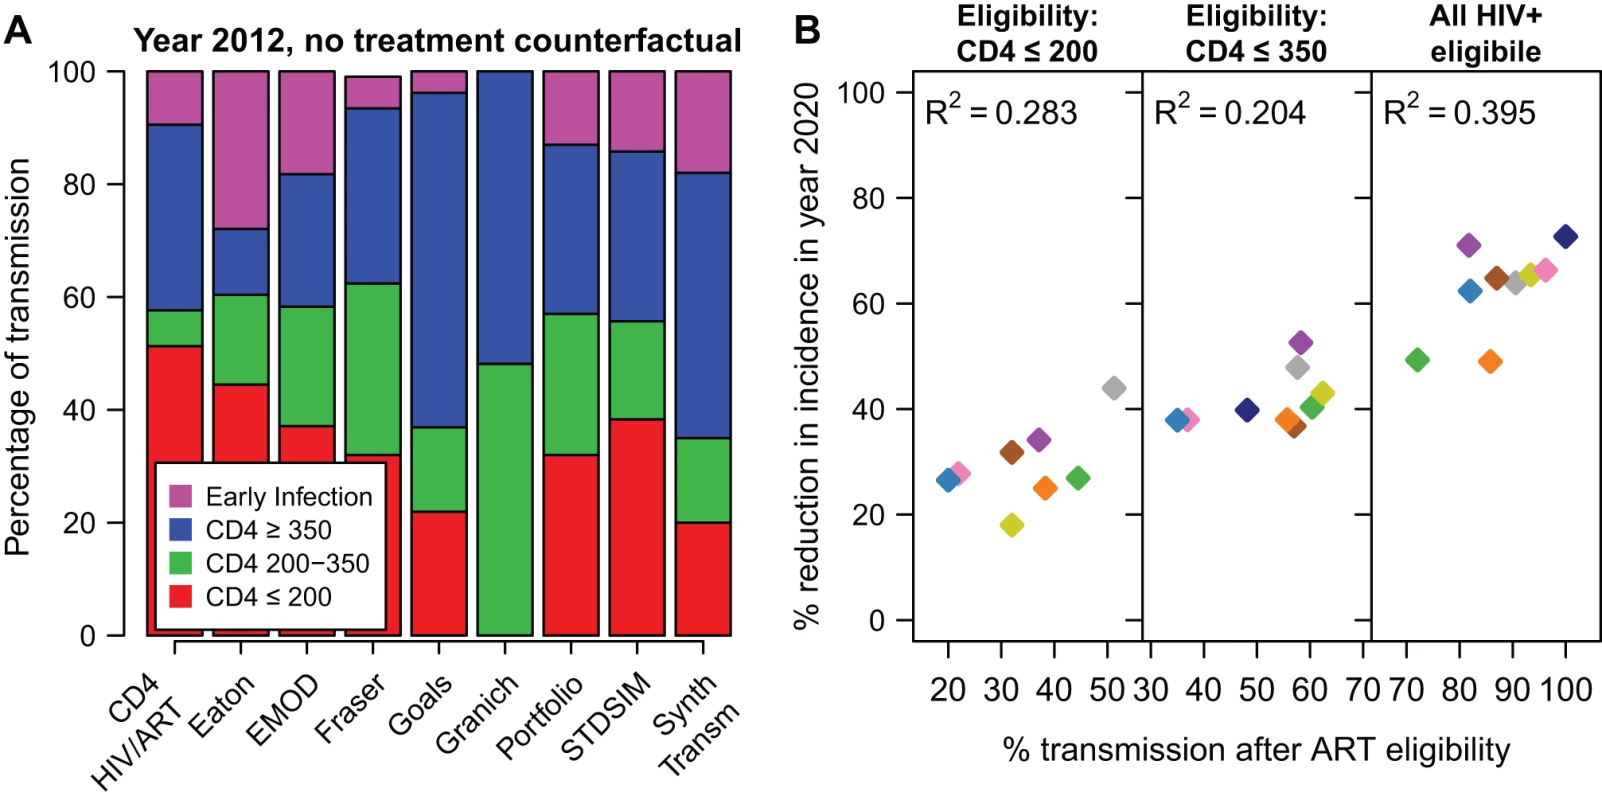 Impact of treatment by transmission in each CD4 category.